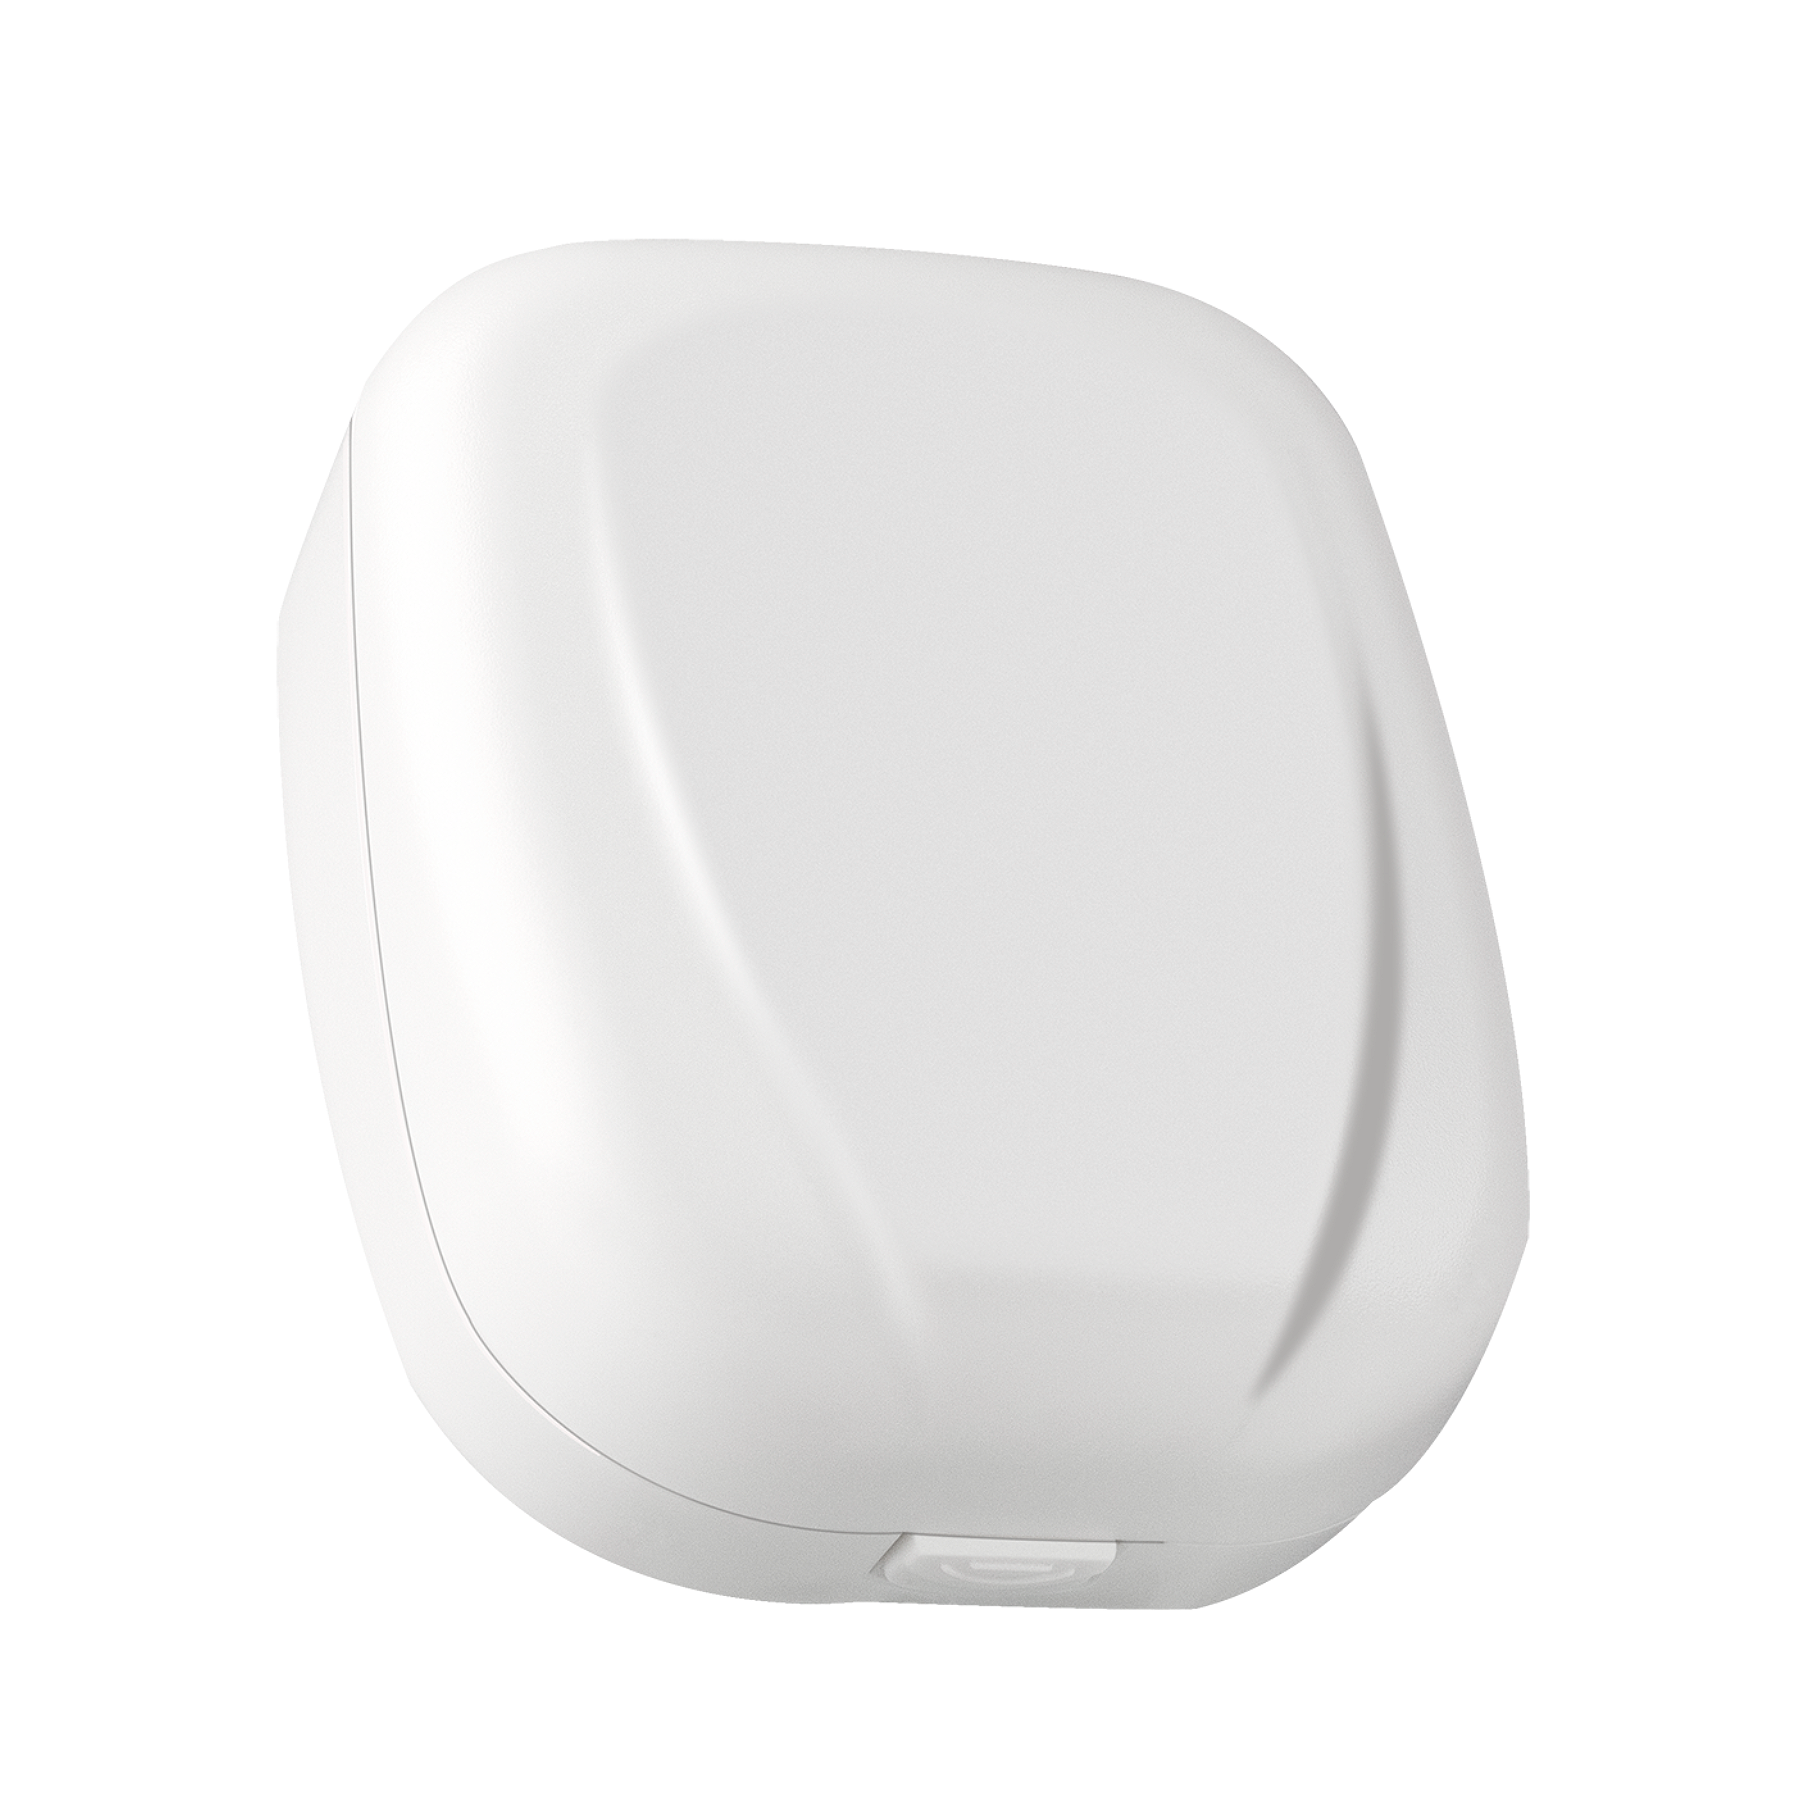 Soundlink BTE Hearing Aids Case With Size 675 Battery Storage